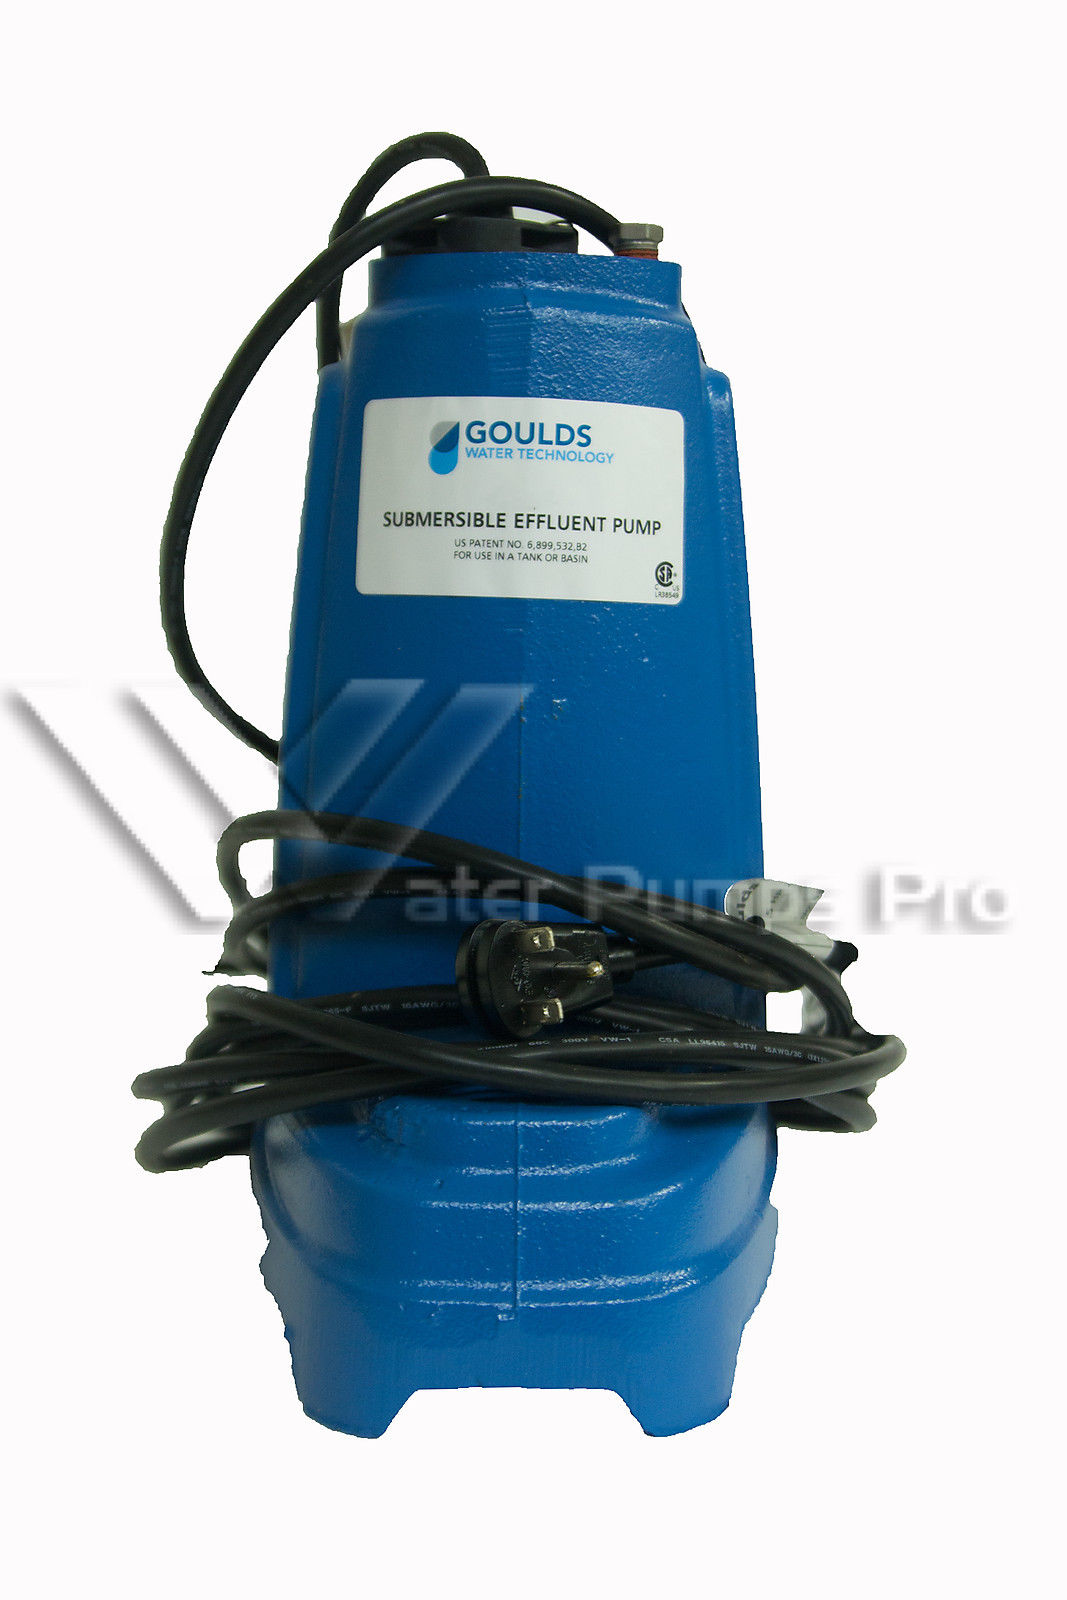 Goulds PE42M 4/10 HP, 230V Submersible Effluent Pump - Click Image to Close